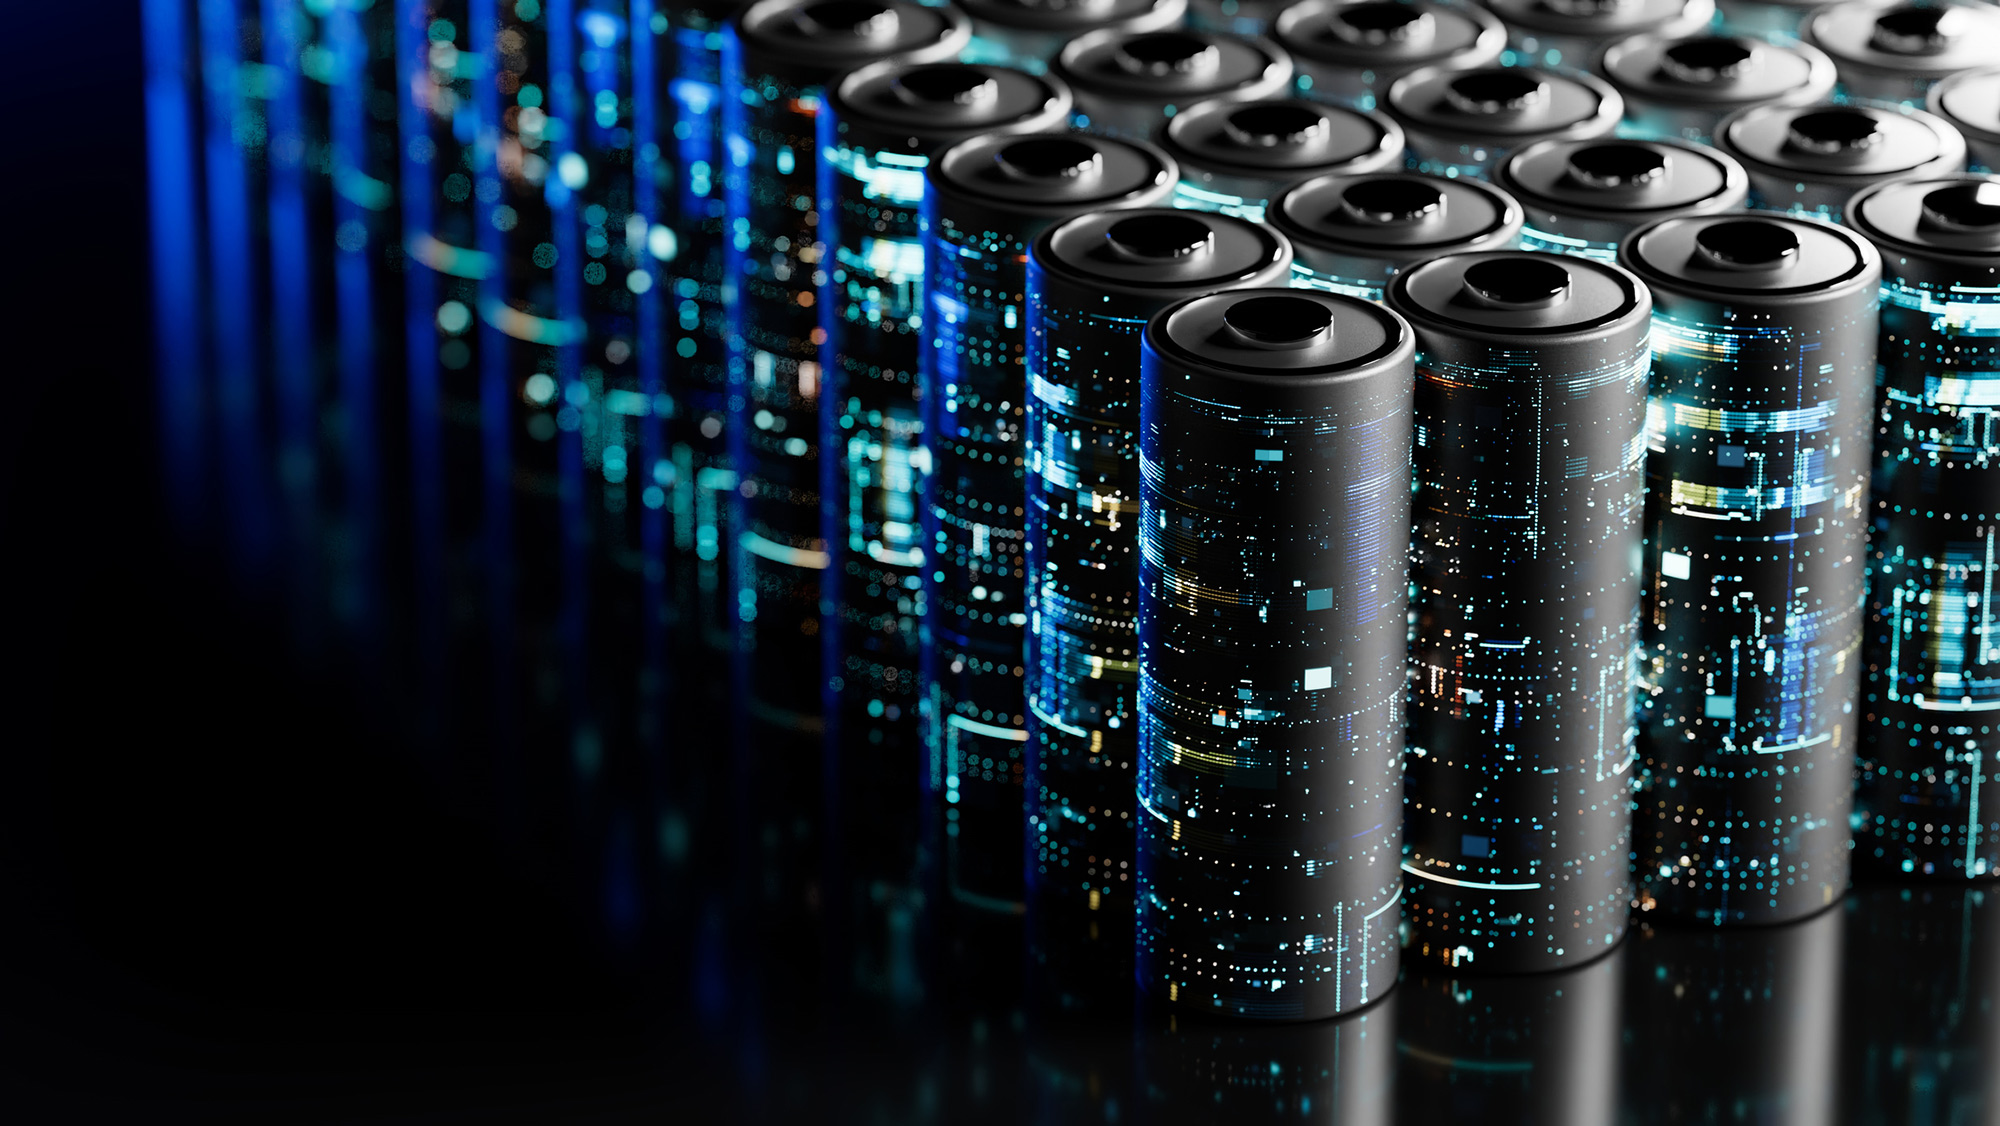 An image showing rows of batteries.